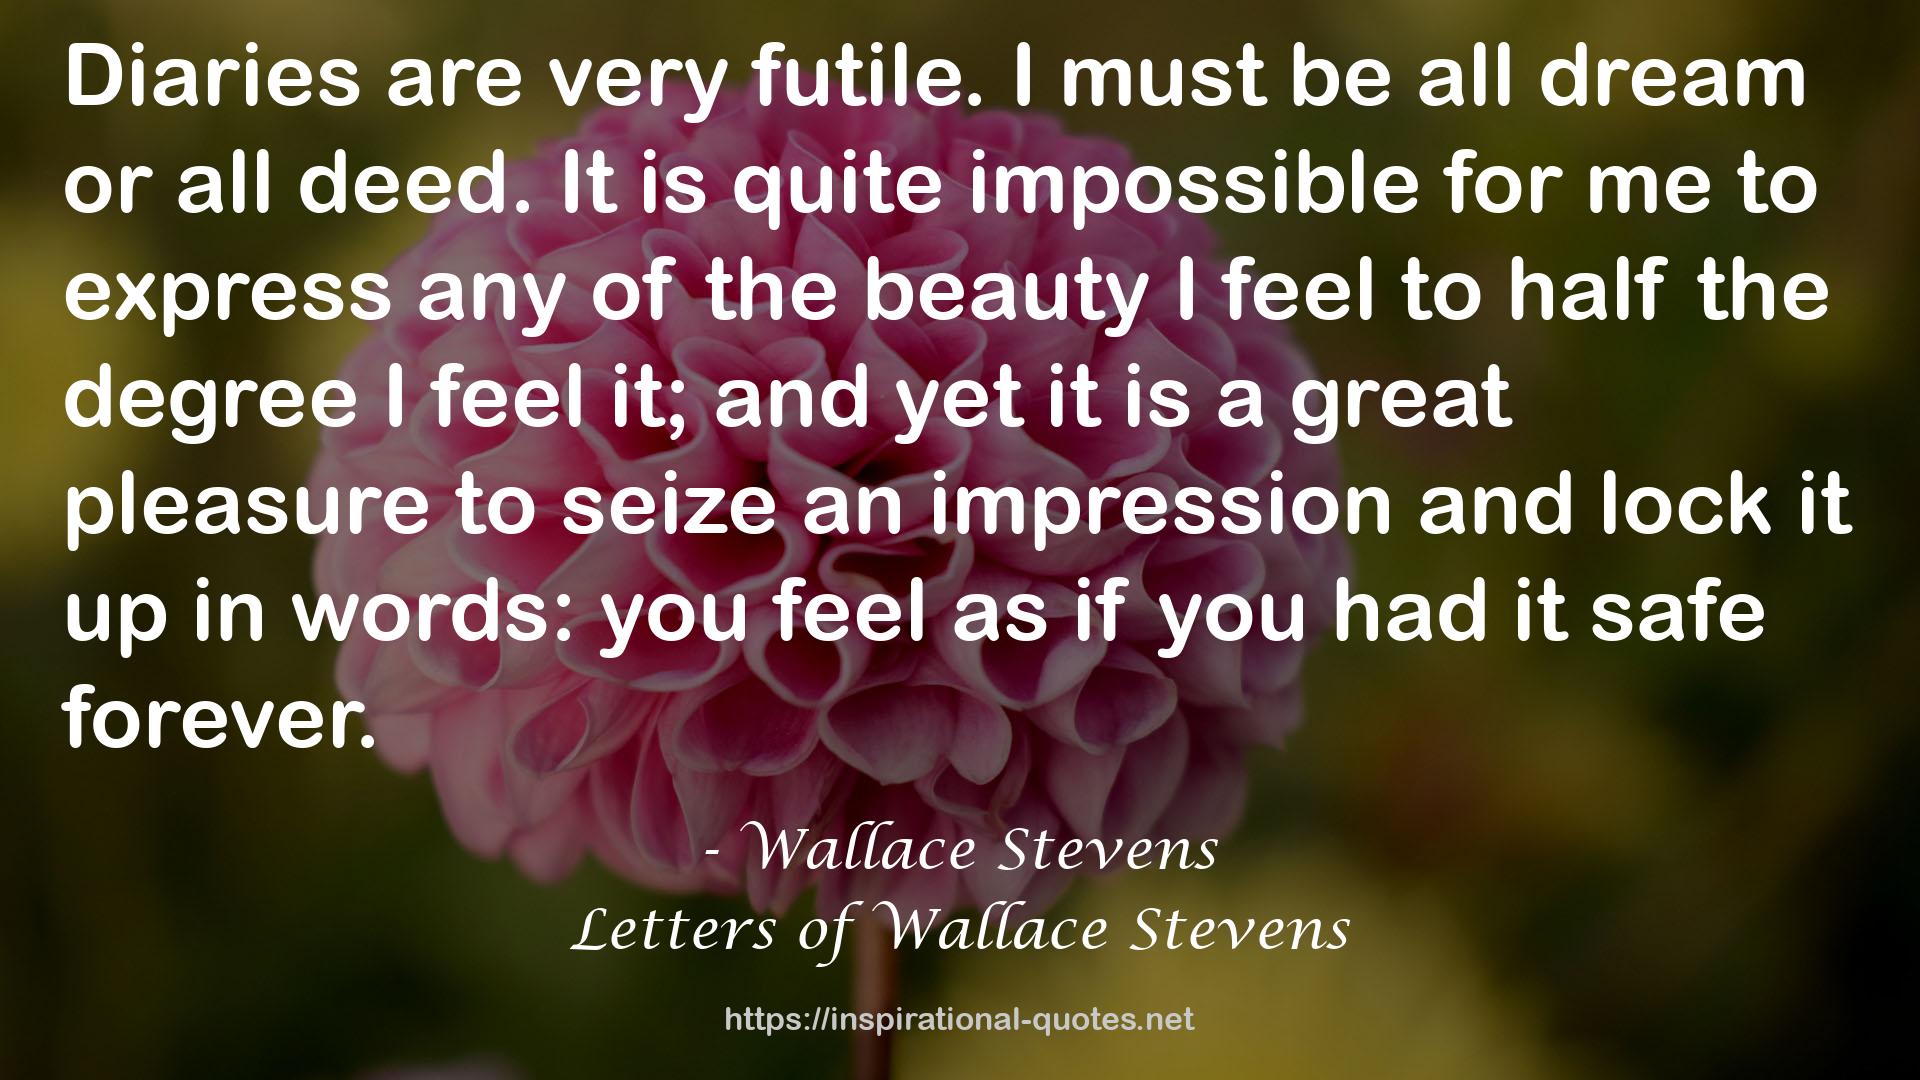 Letters of Wallace Stevens QUOTES